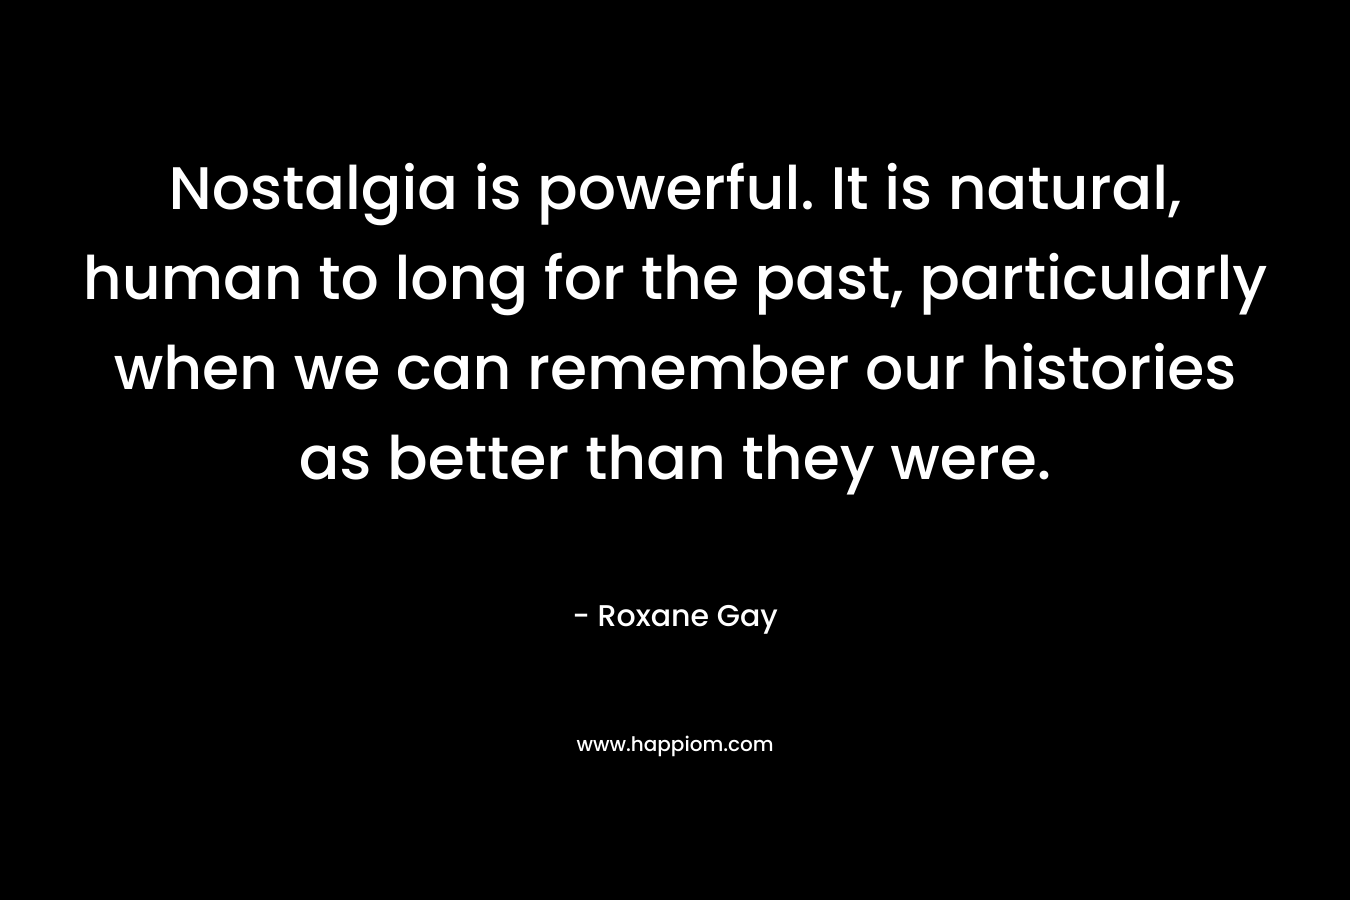 Nostalgia is powerful. It is natural, human to long for the past, particularly when we can remember our histories as better than they were.